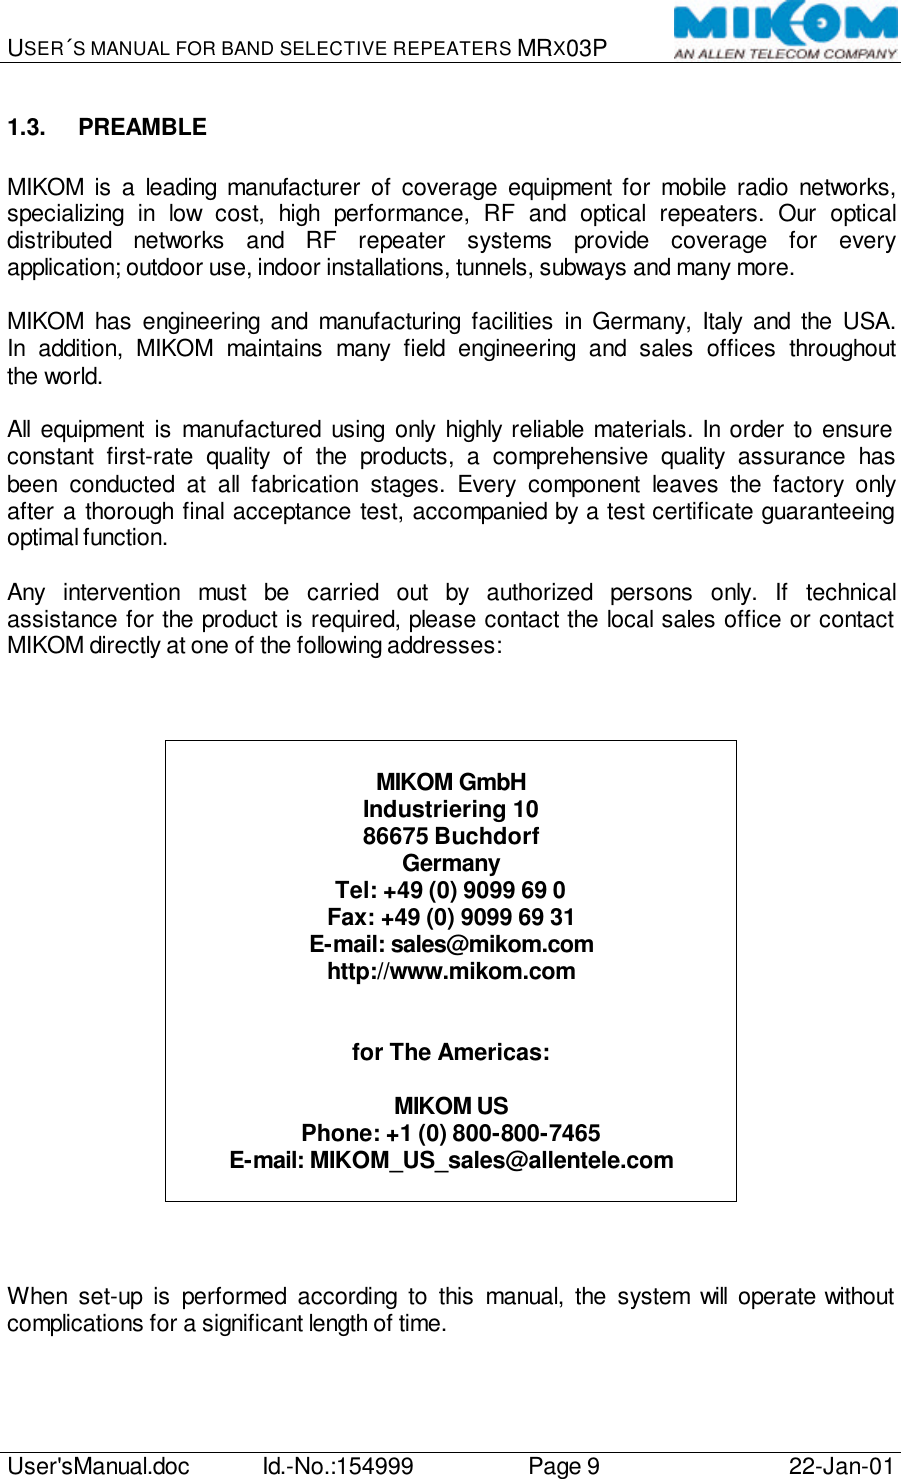 USER´S MANUAL FOR BAND SELECTIVE REPEATERS MRX03P   User&apos;sManual.doc Id.-No.:154999 Page 9 22-Jan-01  1.3. PREAMBLE  MIKOM is a leading manufacturer of coverage equipment for mobile radio networks, specializing in low cost, high performance, RF and optical repeaters. Our optical distributed networks and RF repeater systems provide coverage for every application; outdoor use, indoor installations, tunnels, subways and many more.  MIKOM has engineering and manufacturing facilities in Germany, Italy and the USA. In addition, MIKOM maintains many field engineering and sales offices throughout the world.  All equipment is manufactured using only highly reliable materials. In order to ensure constant first-rate quality of the products, a comprehensive quality assurance has been conducted at all fabrication stages. Every component leaves the factory only after a thorough final acceptance test, accompanied by a test certificate guaranteeing optimal function.  Any intervention must be carried out by authorized persons only. If technical assistance for the product is required, please contact the local sales office or contact MIKOM directly at one of the following addresses:     MIKOM GmbH Industriering 10 86675 Buchdorf Germany Tel: +49 (0) 9099 69 0 Fax: +49 (0) 9099 69 31 E-mail: sales@mikom.com http://www.mikom.com   for The Americas:  MIKOM US Phone: +1 (0) 800-800-7465 E-mail: MIKOM_US_sales@allentele.com     When set-up is performed according to this manual, the system will  operate without complications for a significant length of time. 